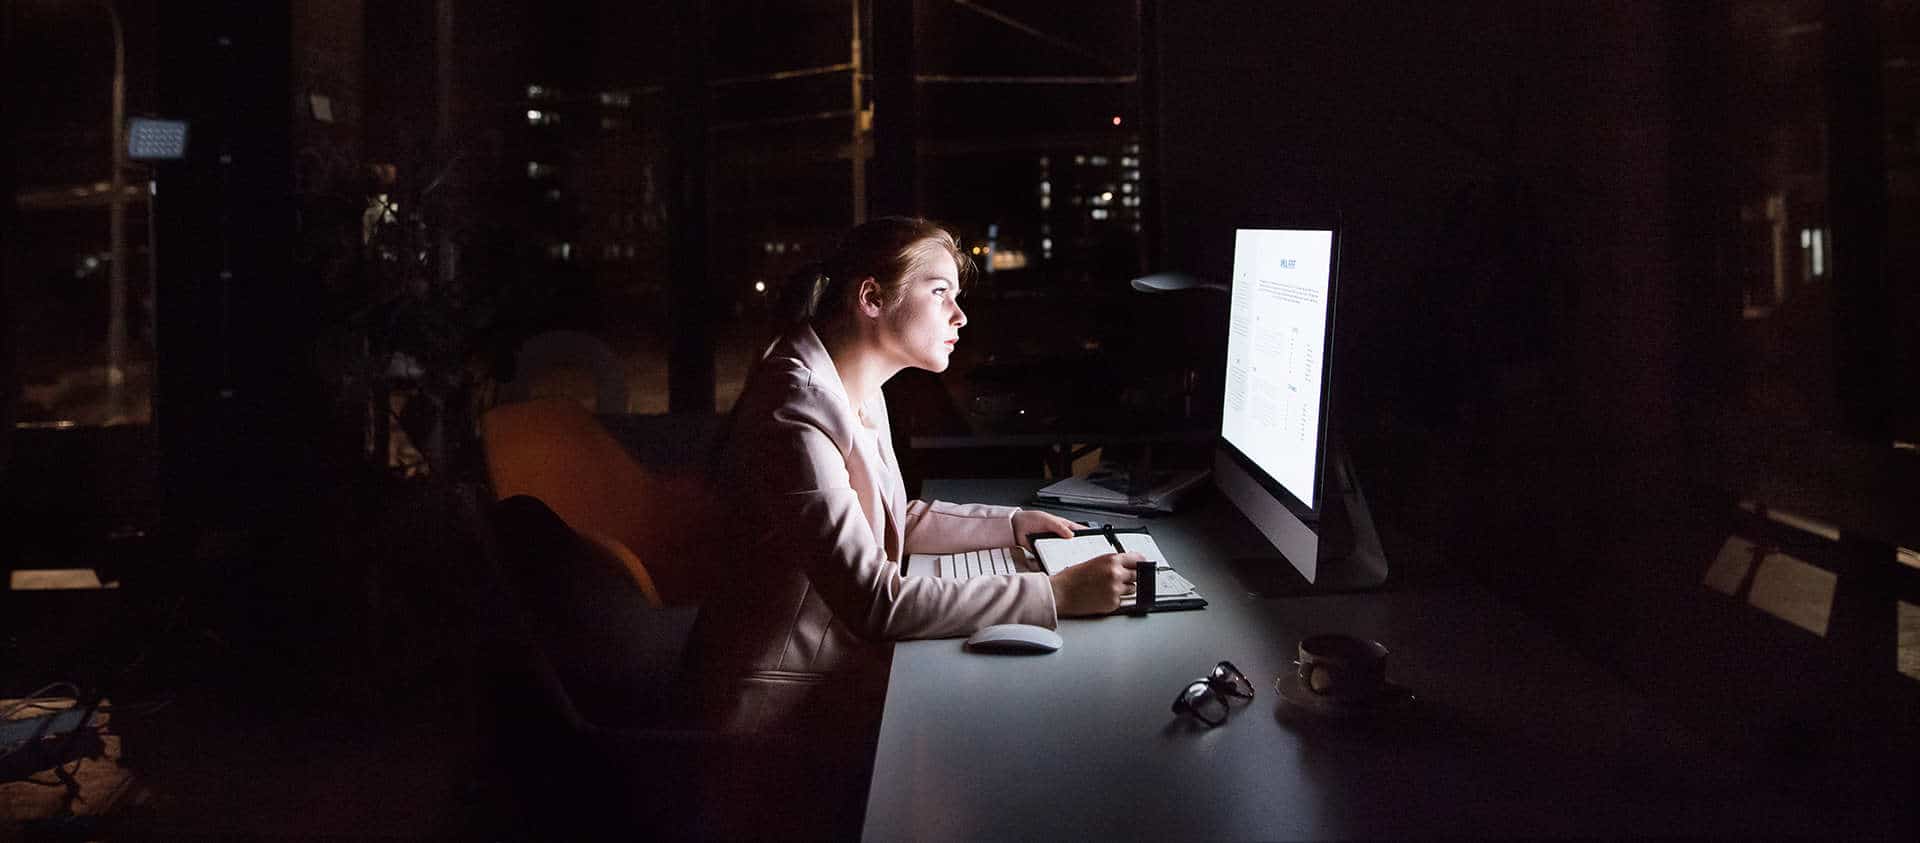 Businesswoman in front of computer screen in office at night